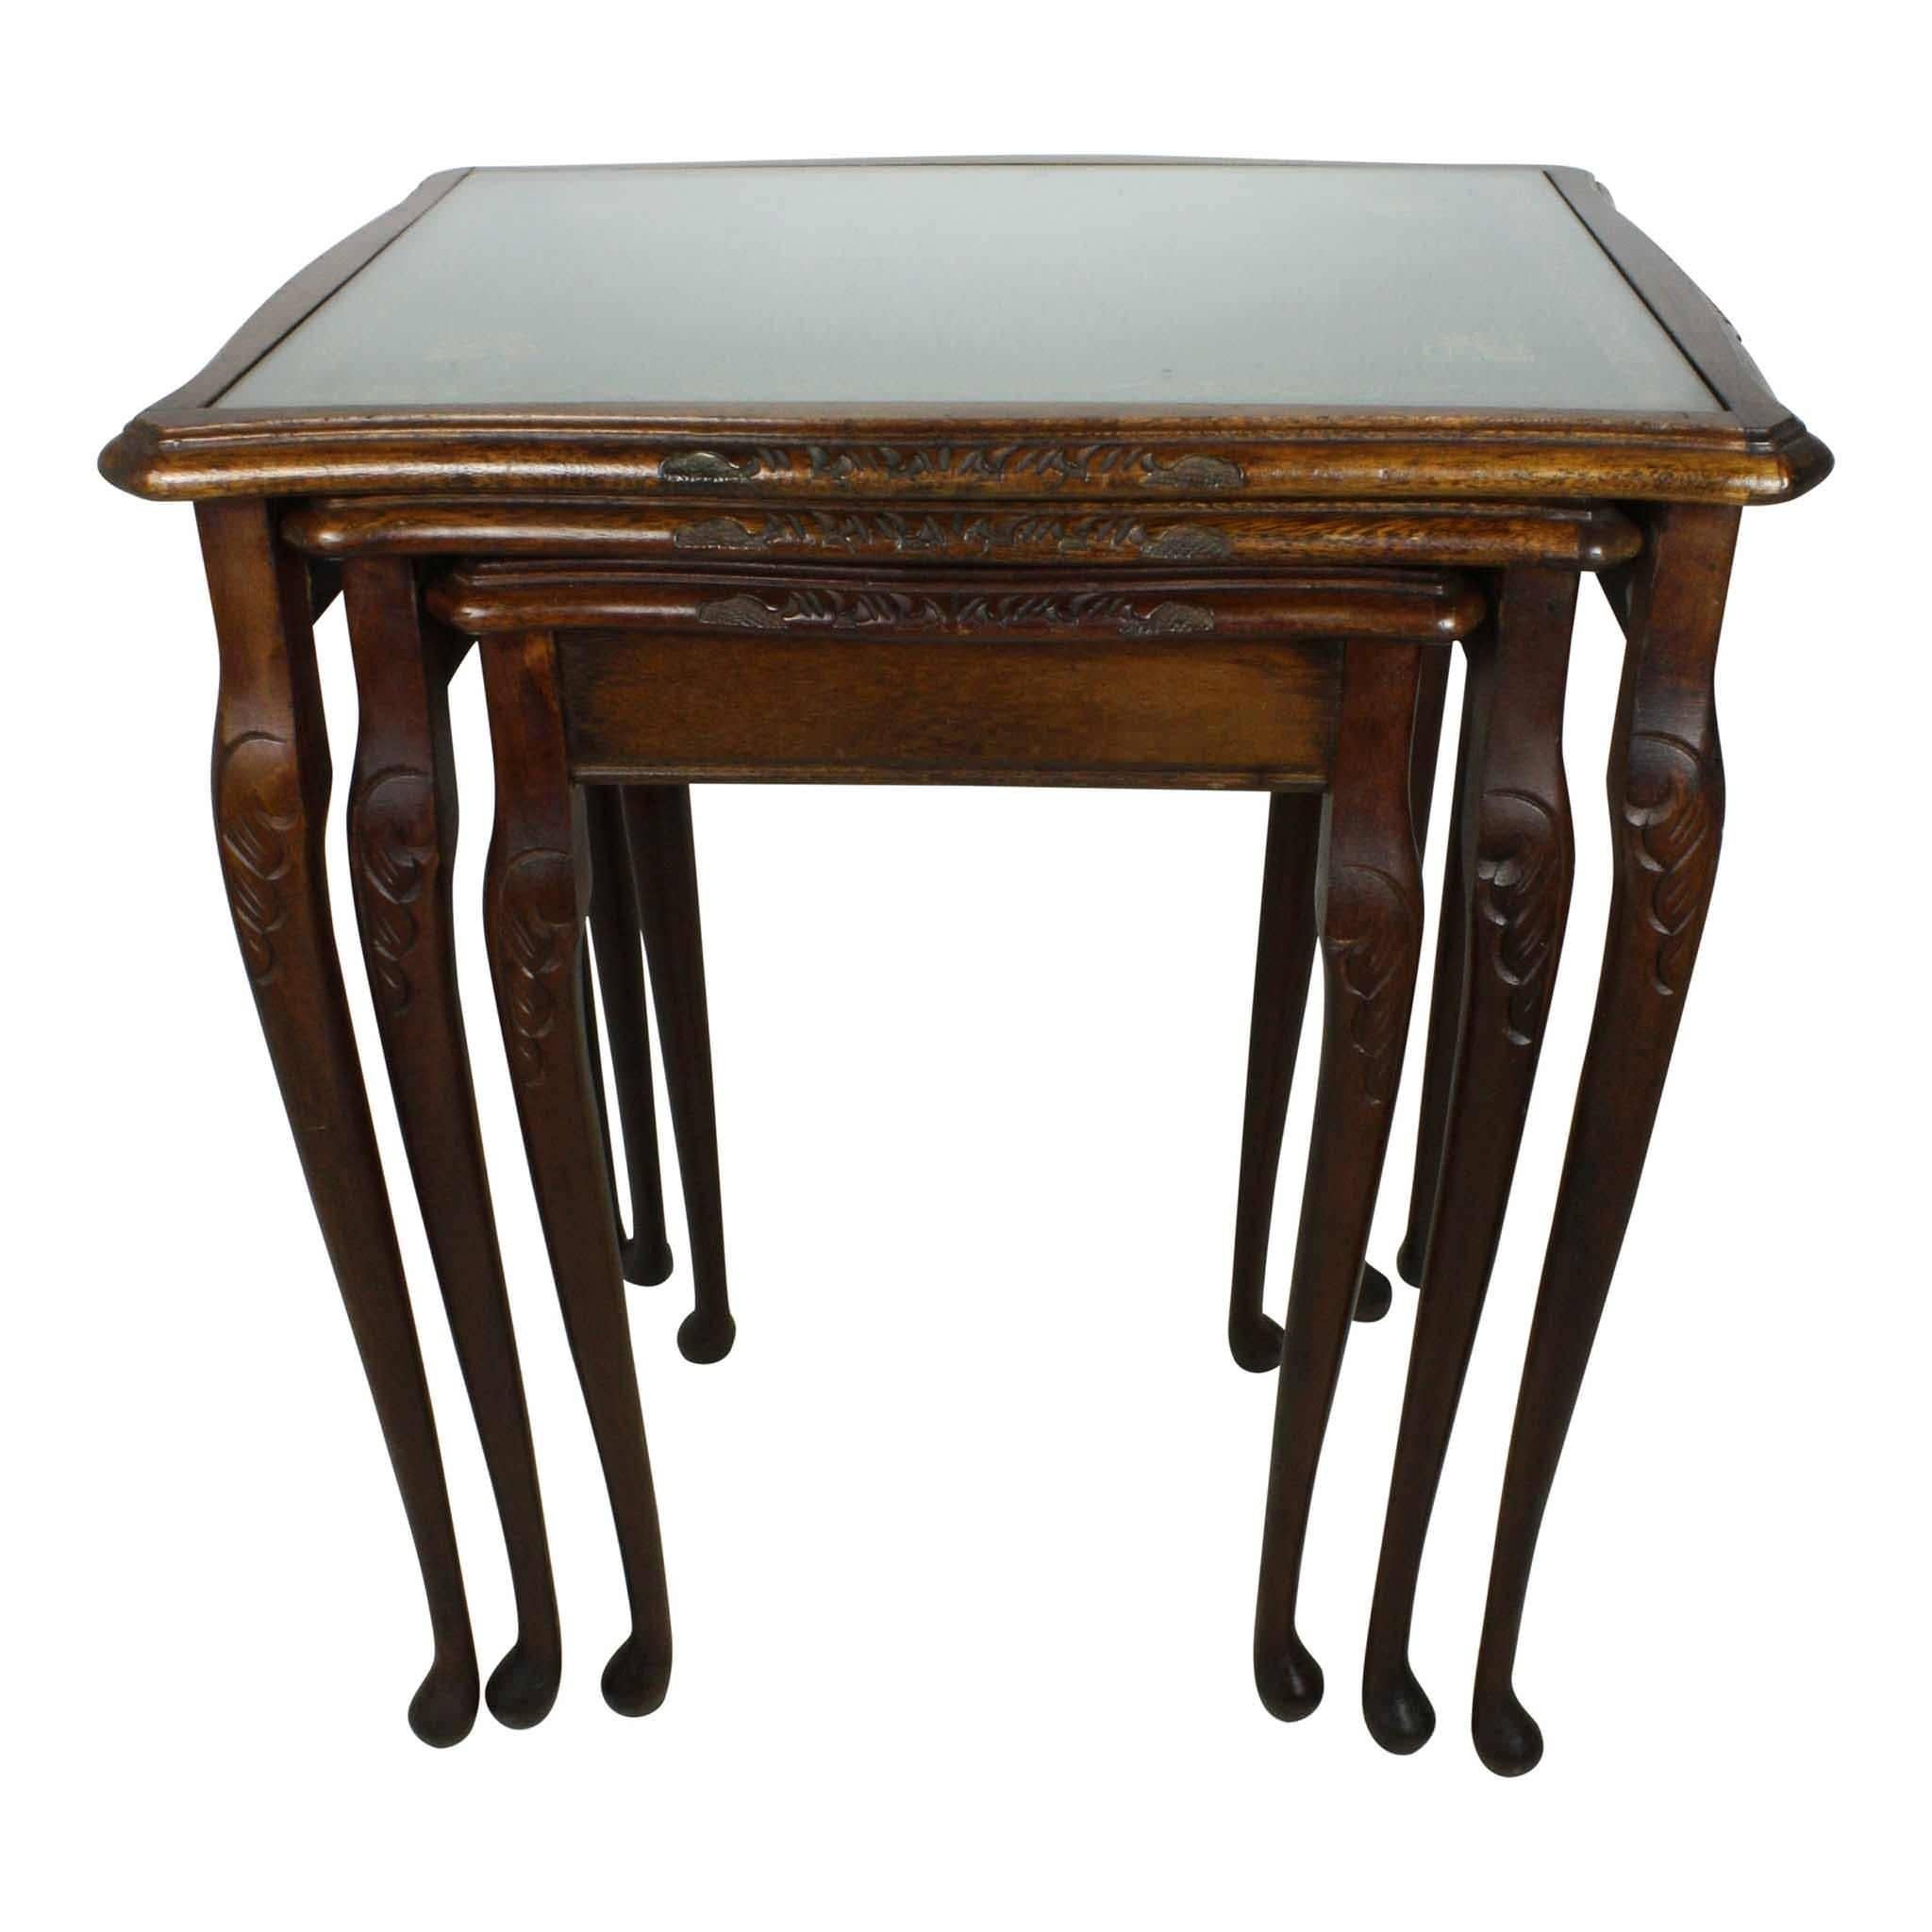 This set has three tables with green, leather tops with gilt tooling on the edges. Each is covered with removable glass. The Queen Anne legs give an elegant look. Dimensions for the large table: L 20" x W 15.5" x H 21.75". Dimensions